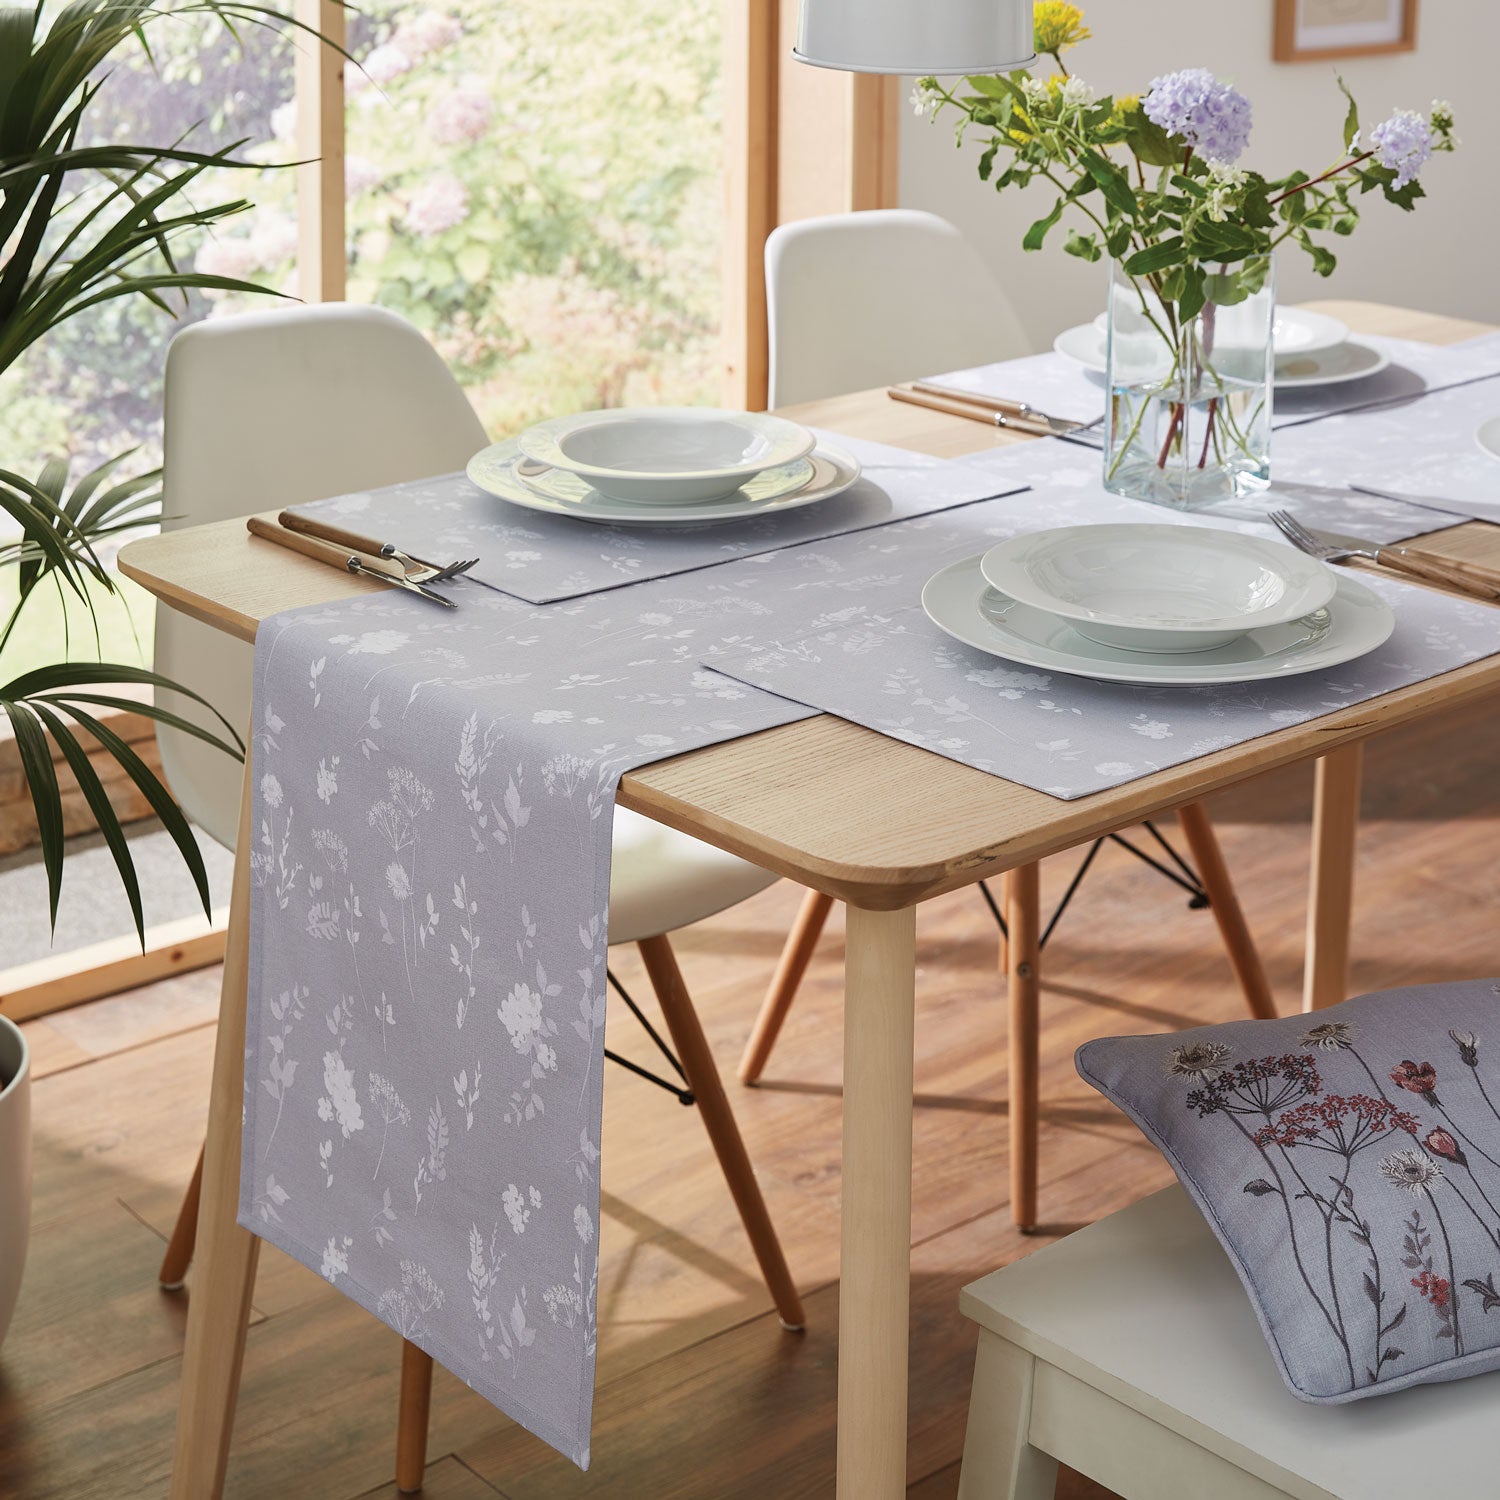 Catherine Lansfield Dining Meadowsweet Floral Table Runner - White / Grey 2 Shaws Department Stores